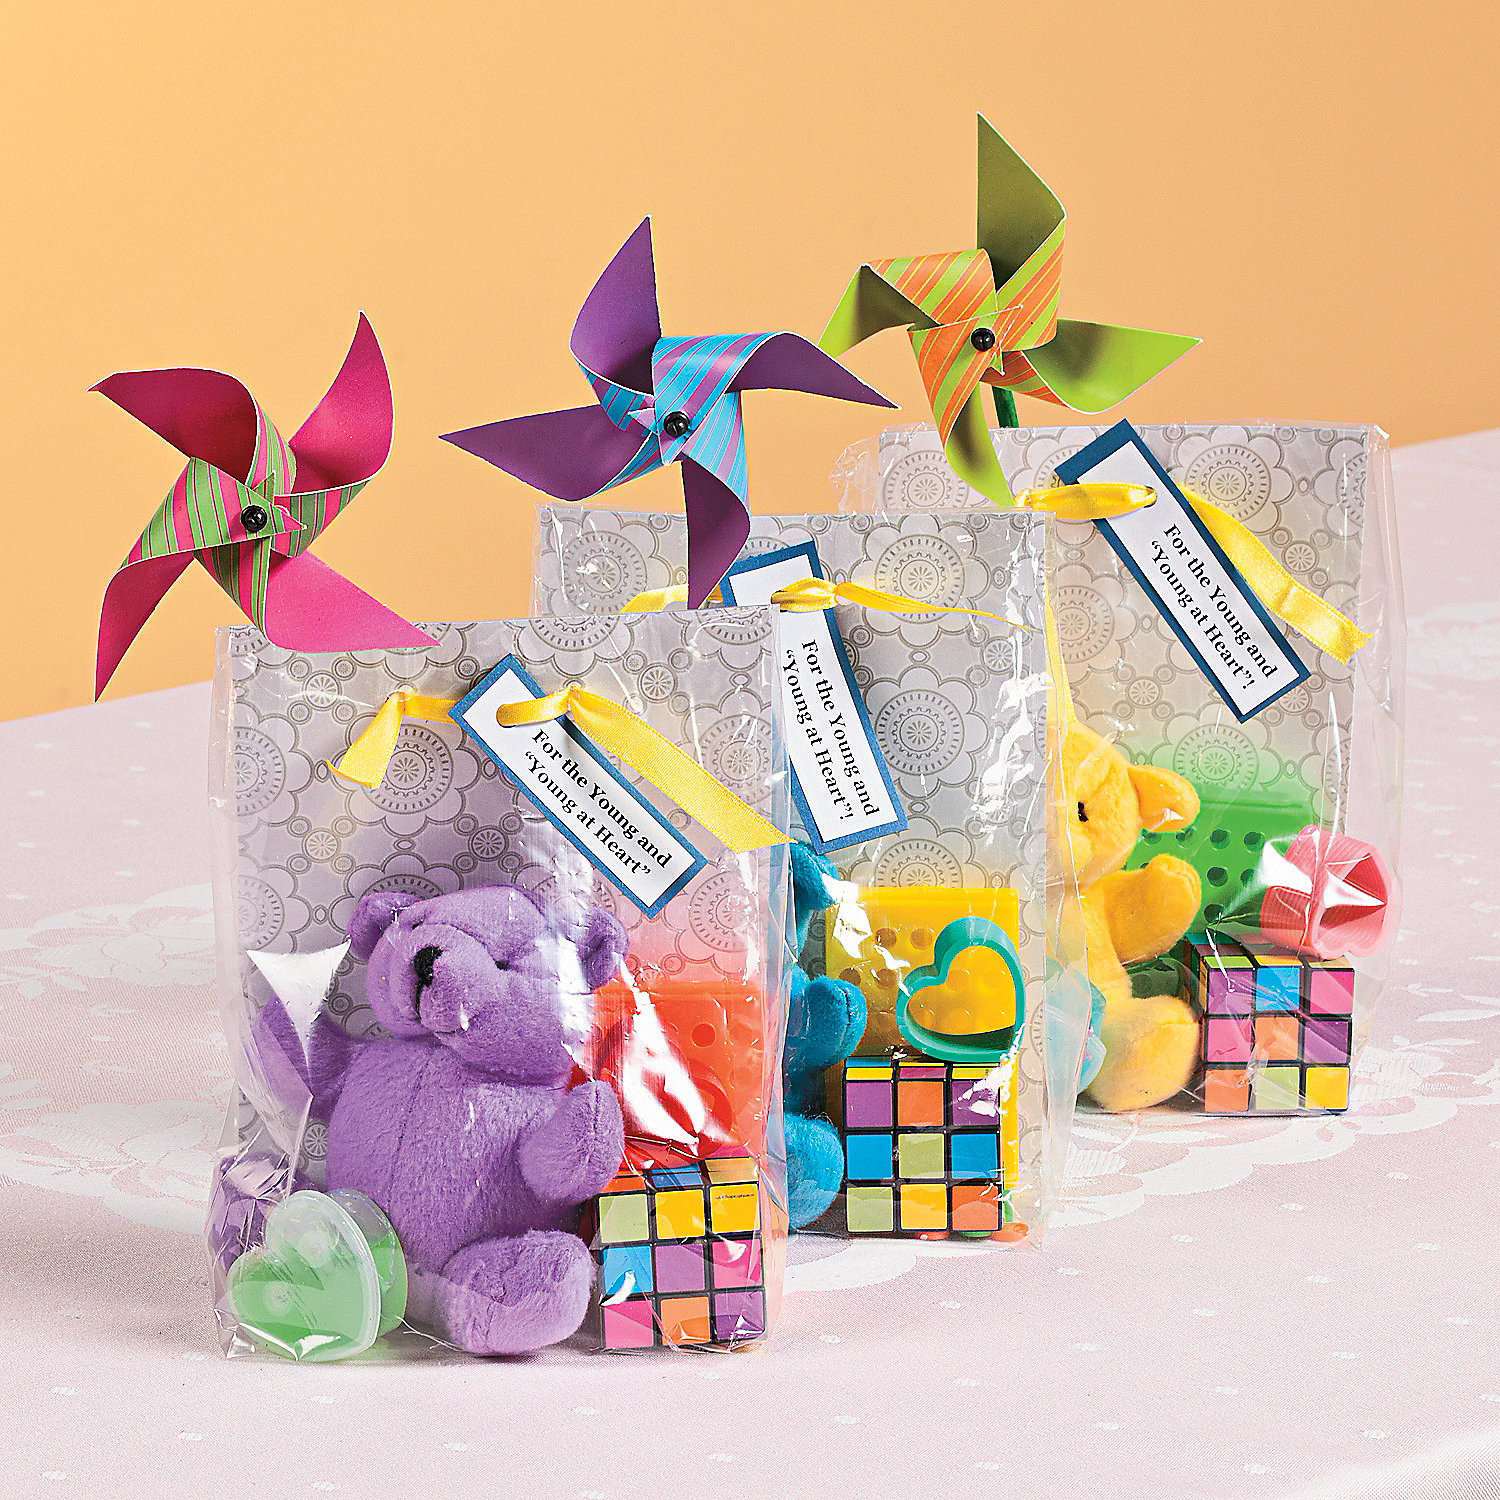 Wedding Party Favors For Kids
 For the Young and the “Young at Heart” Wedding Favors Idea